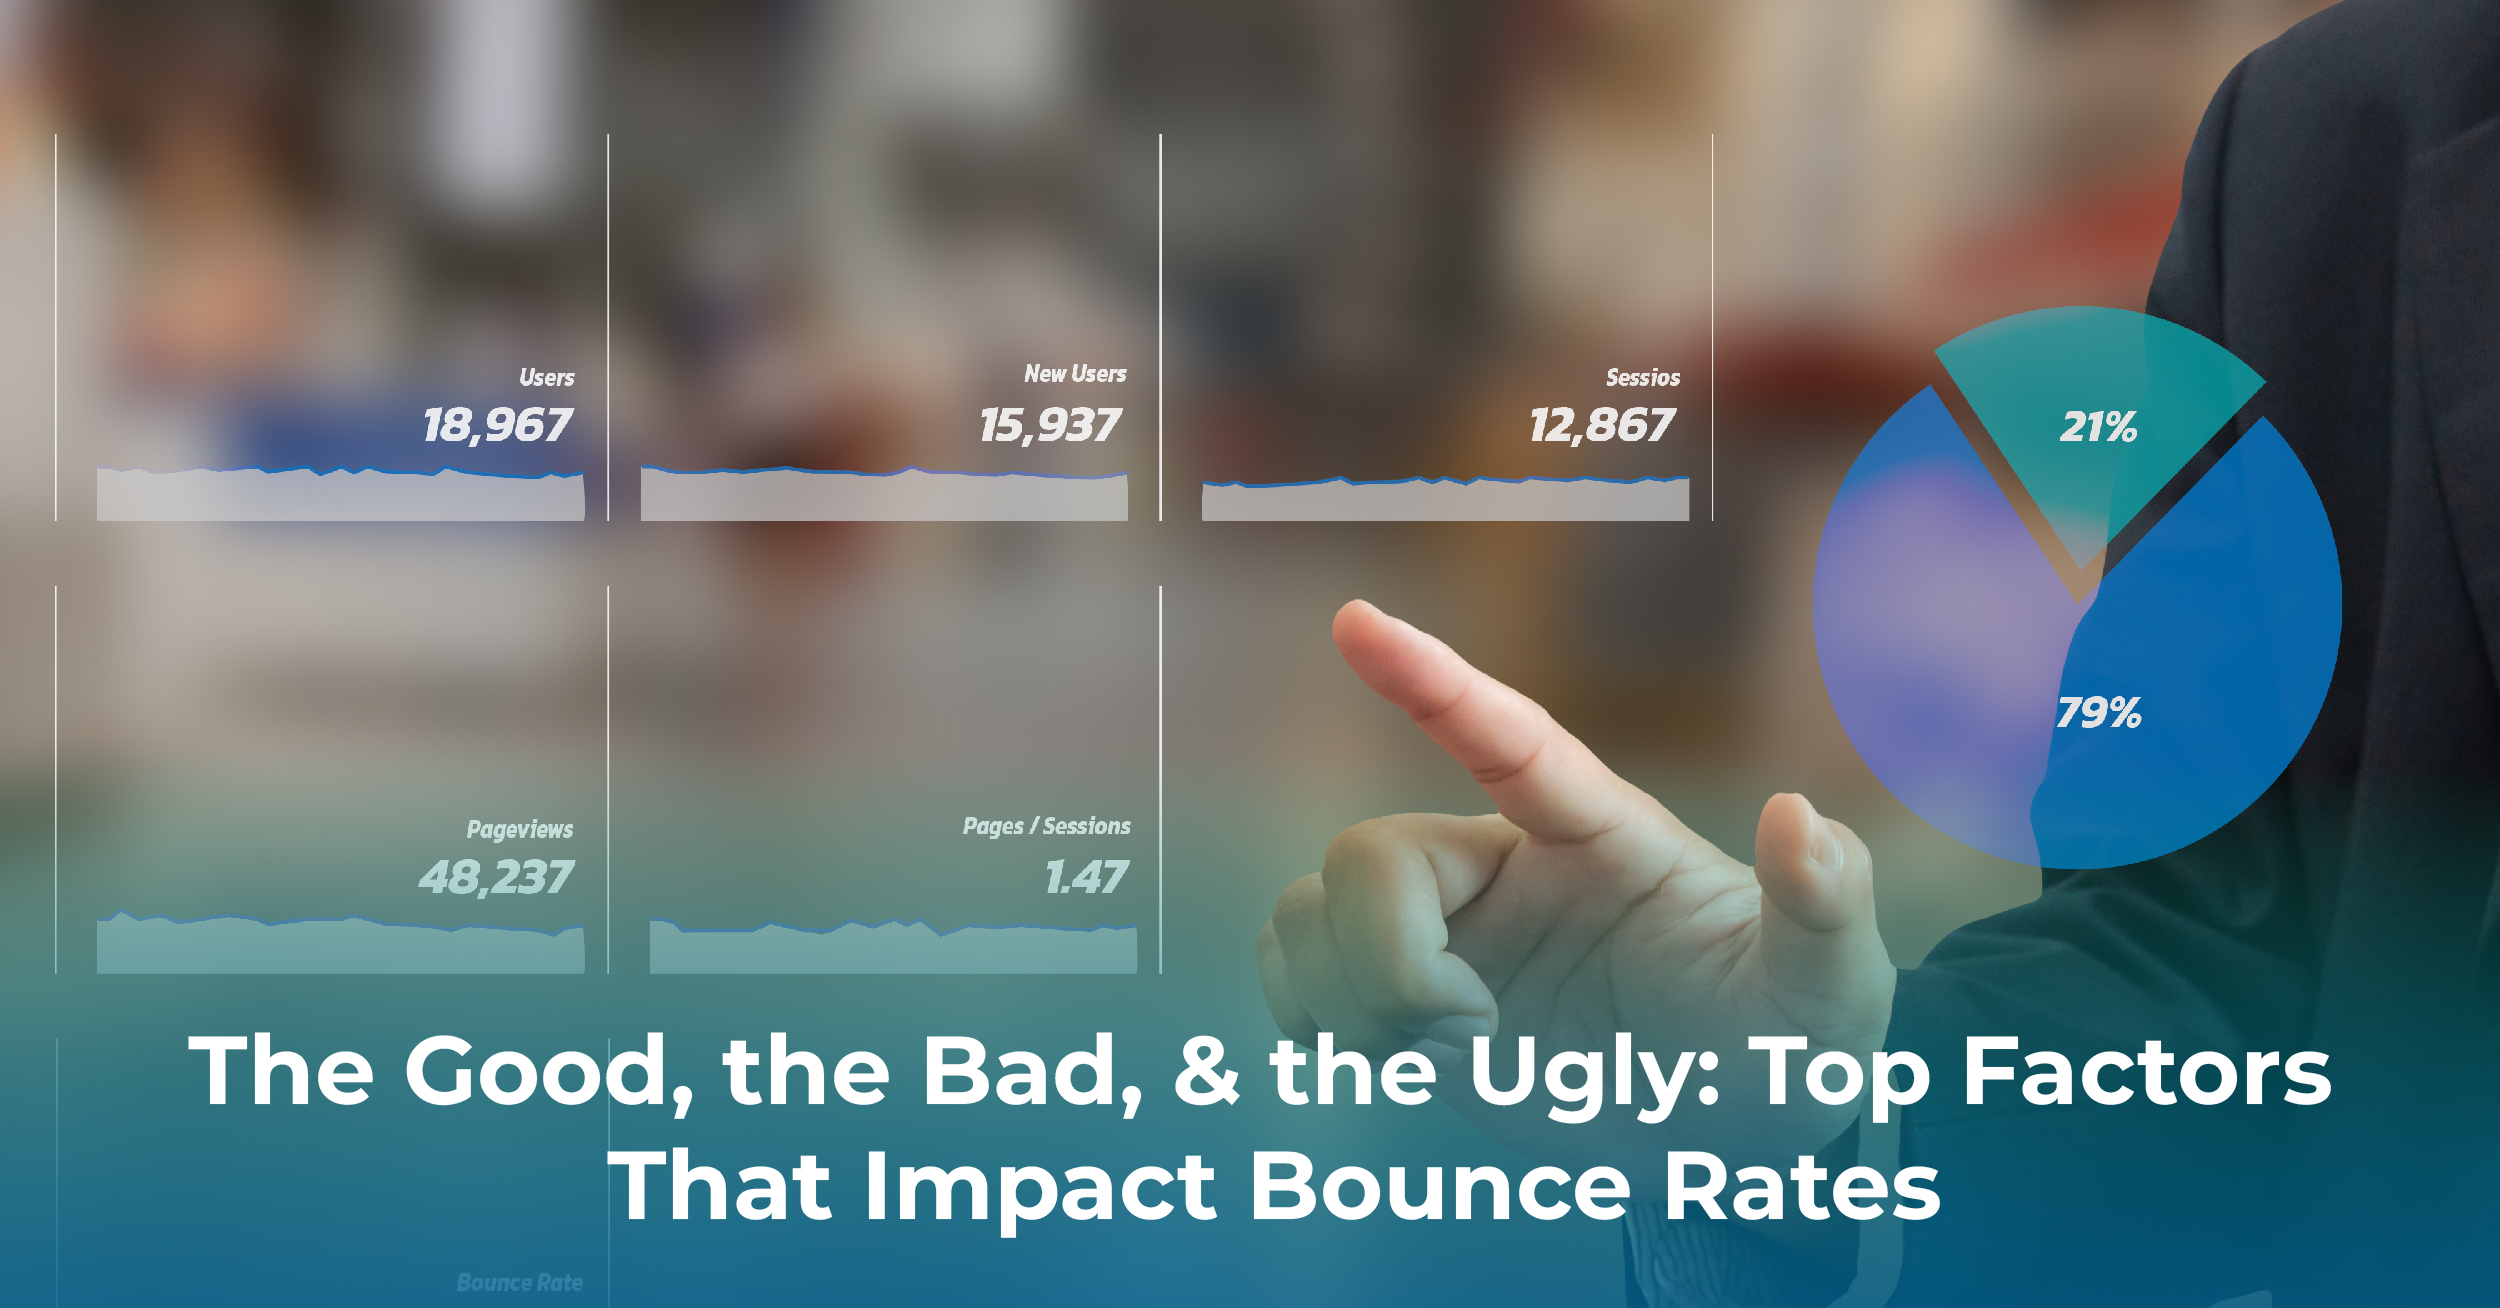 The Good, the Bad, & the Ugly: Top Factors That Impact Bounce Rates